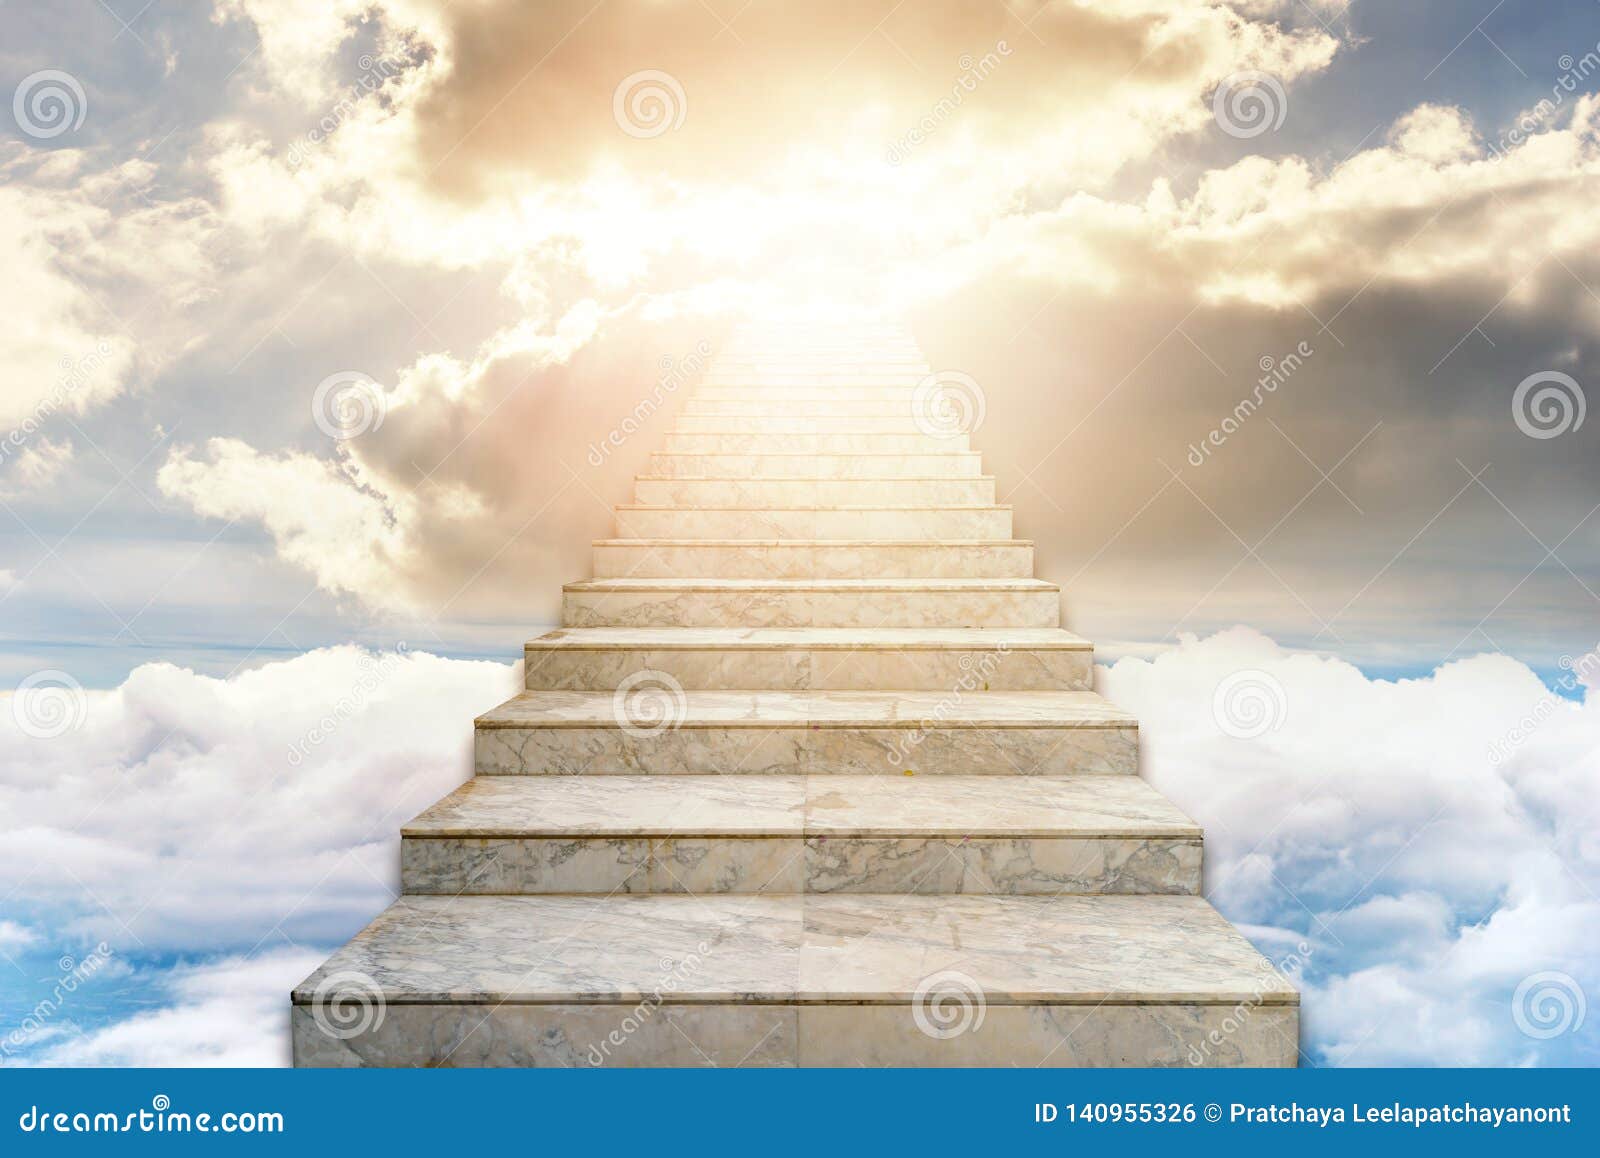 stairway to heaven. concept religion